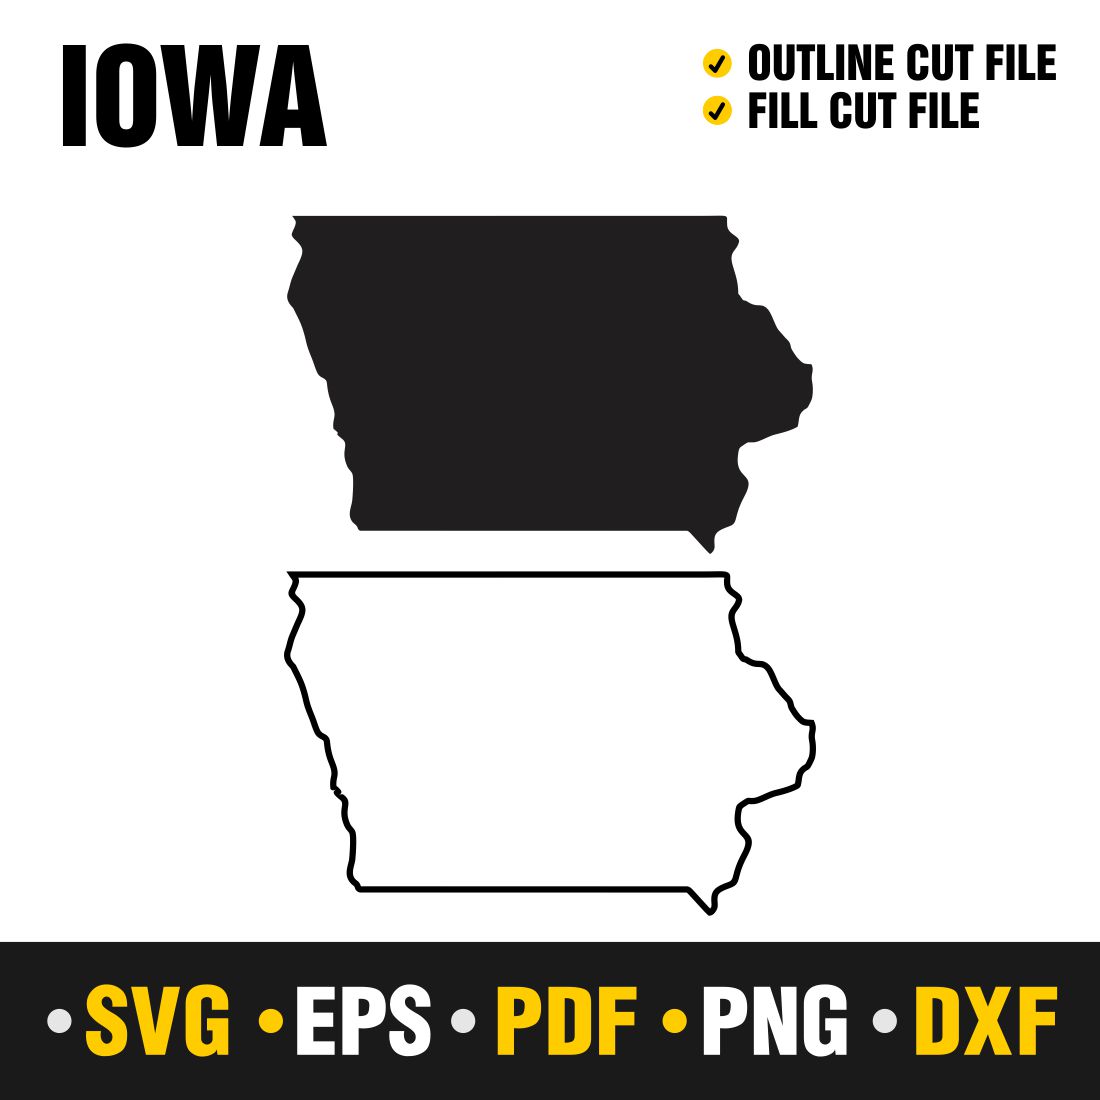 Iowa SVG, PNG, PDF, EPS & DXF cover image.